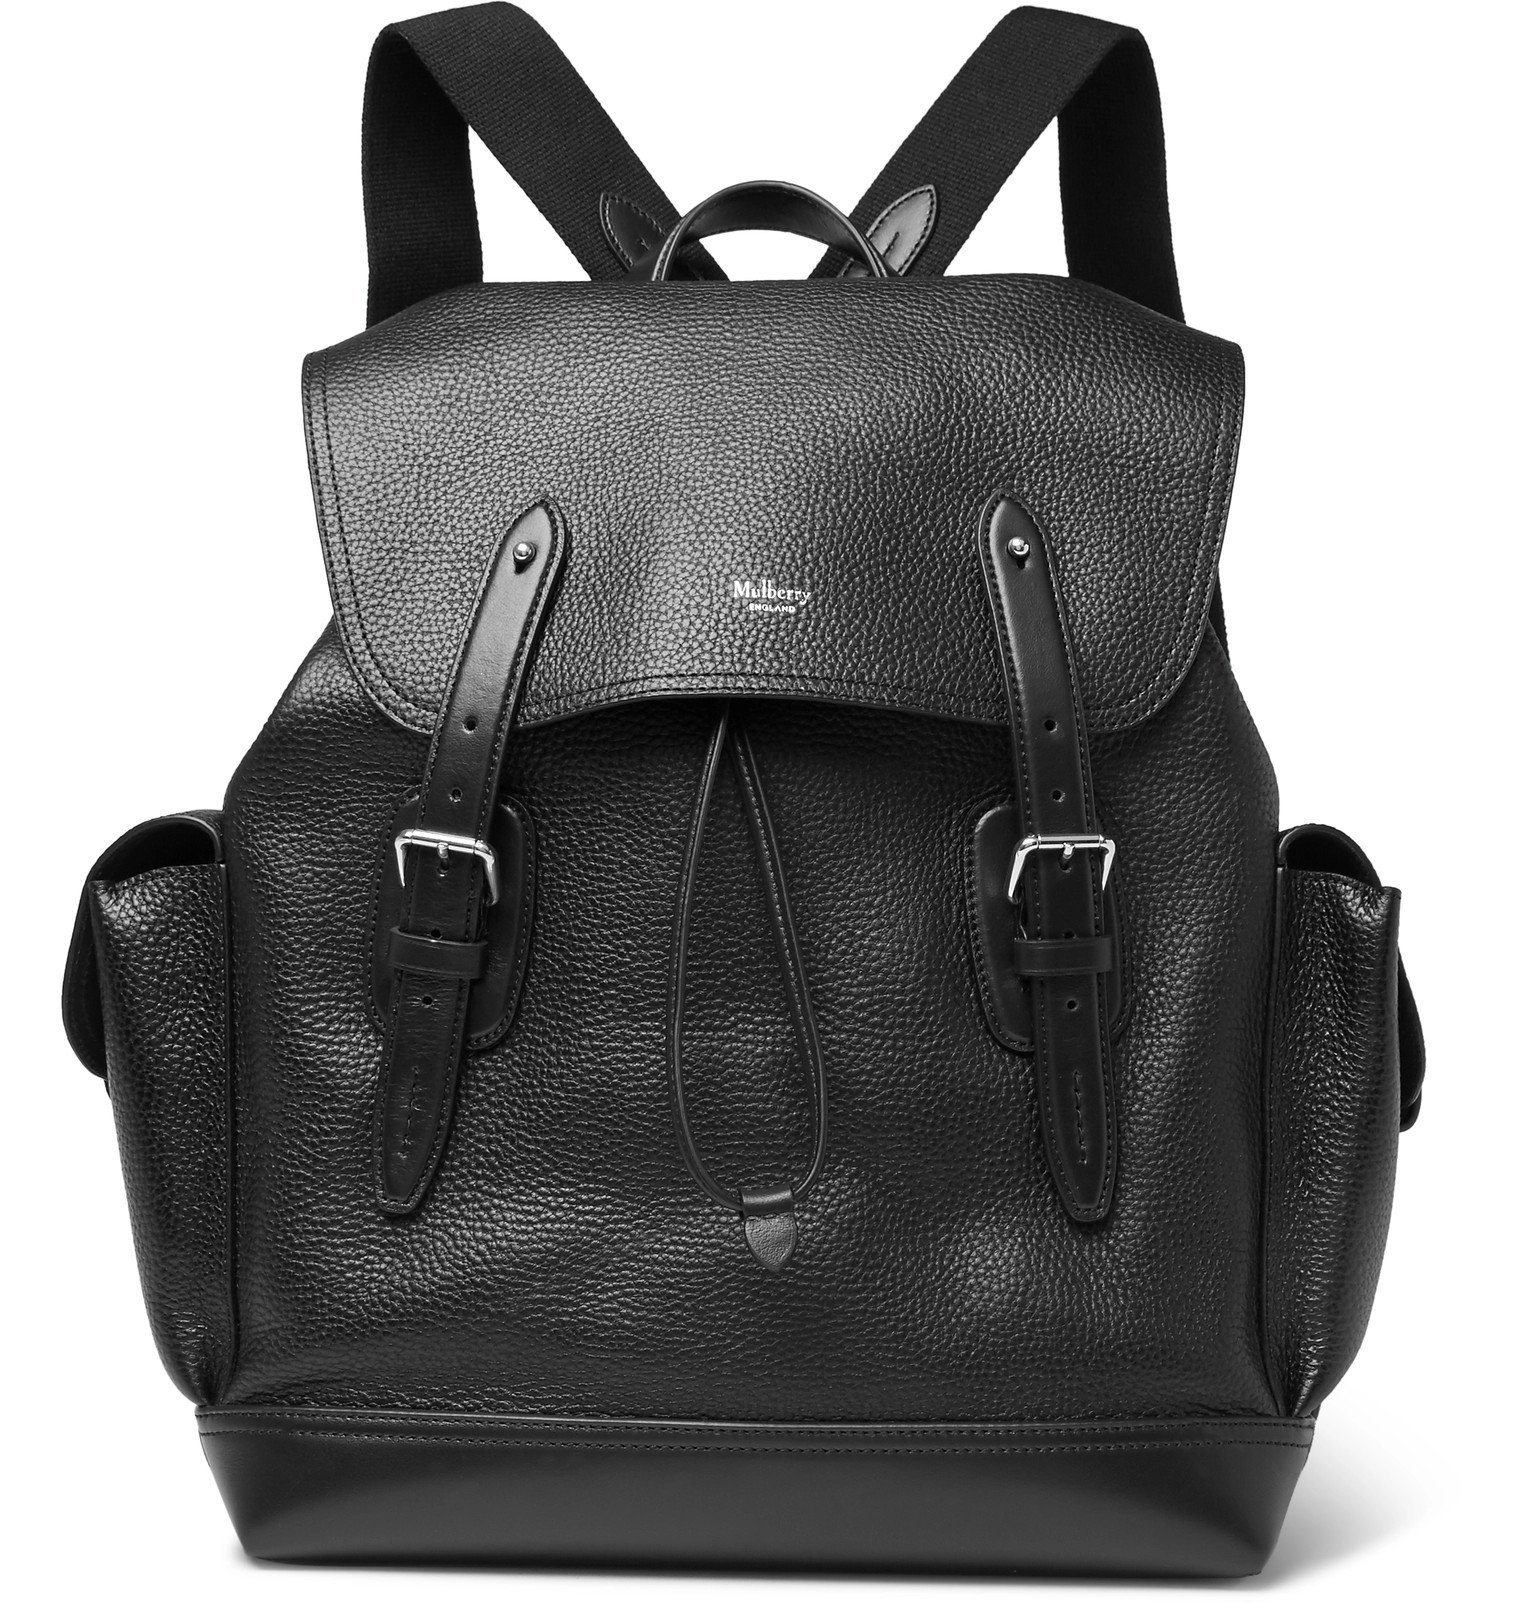 Mulberry - Heritage Full-Grain Leather Backpack - Black Mulberry